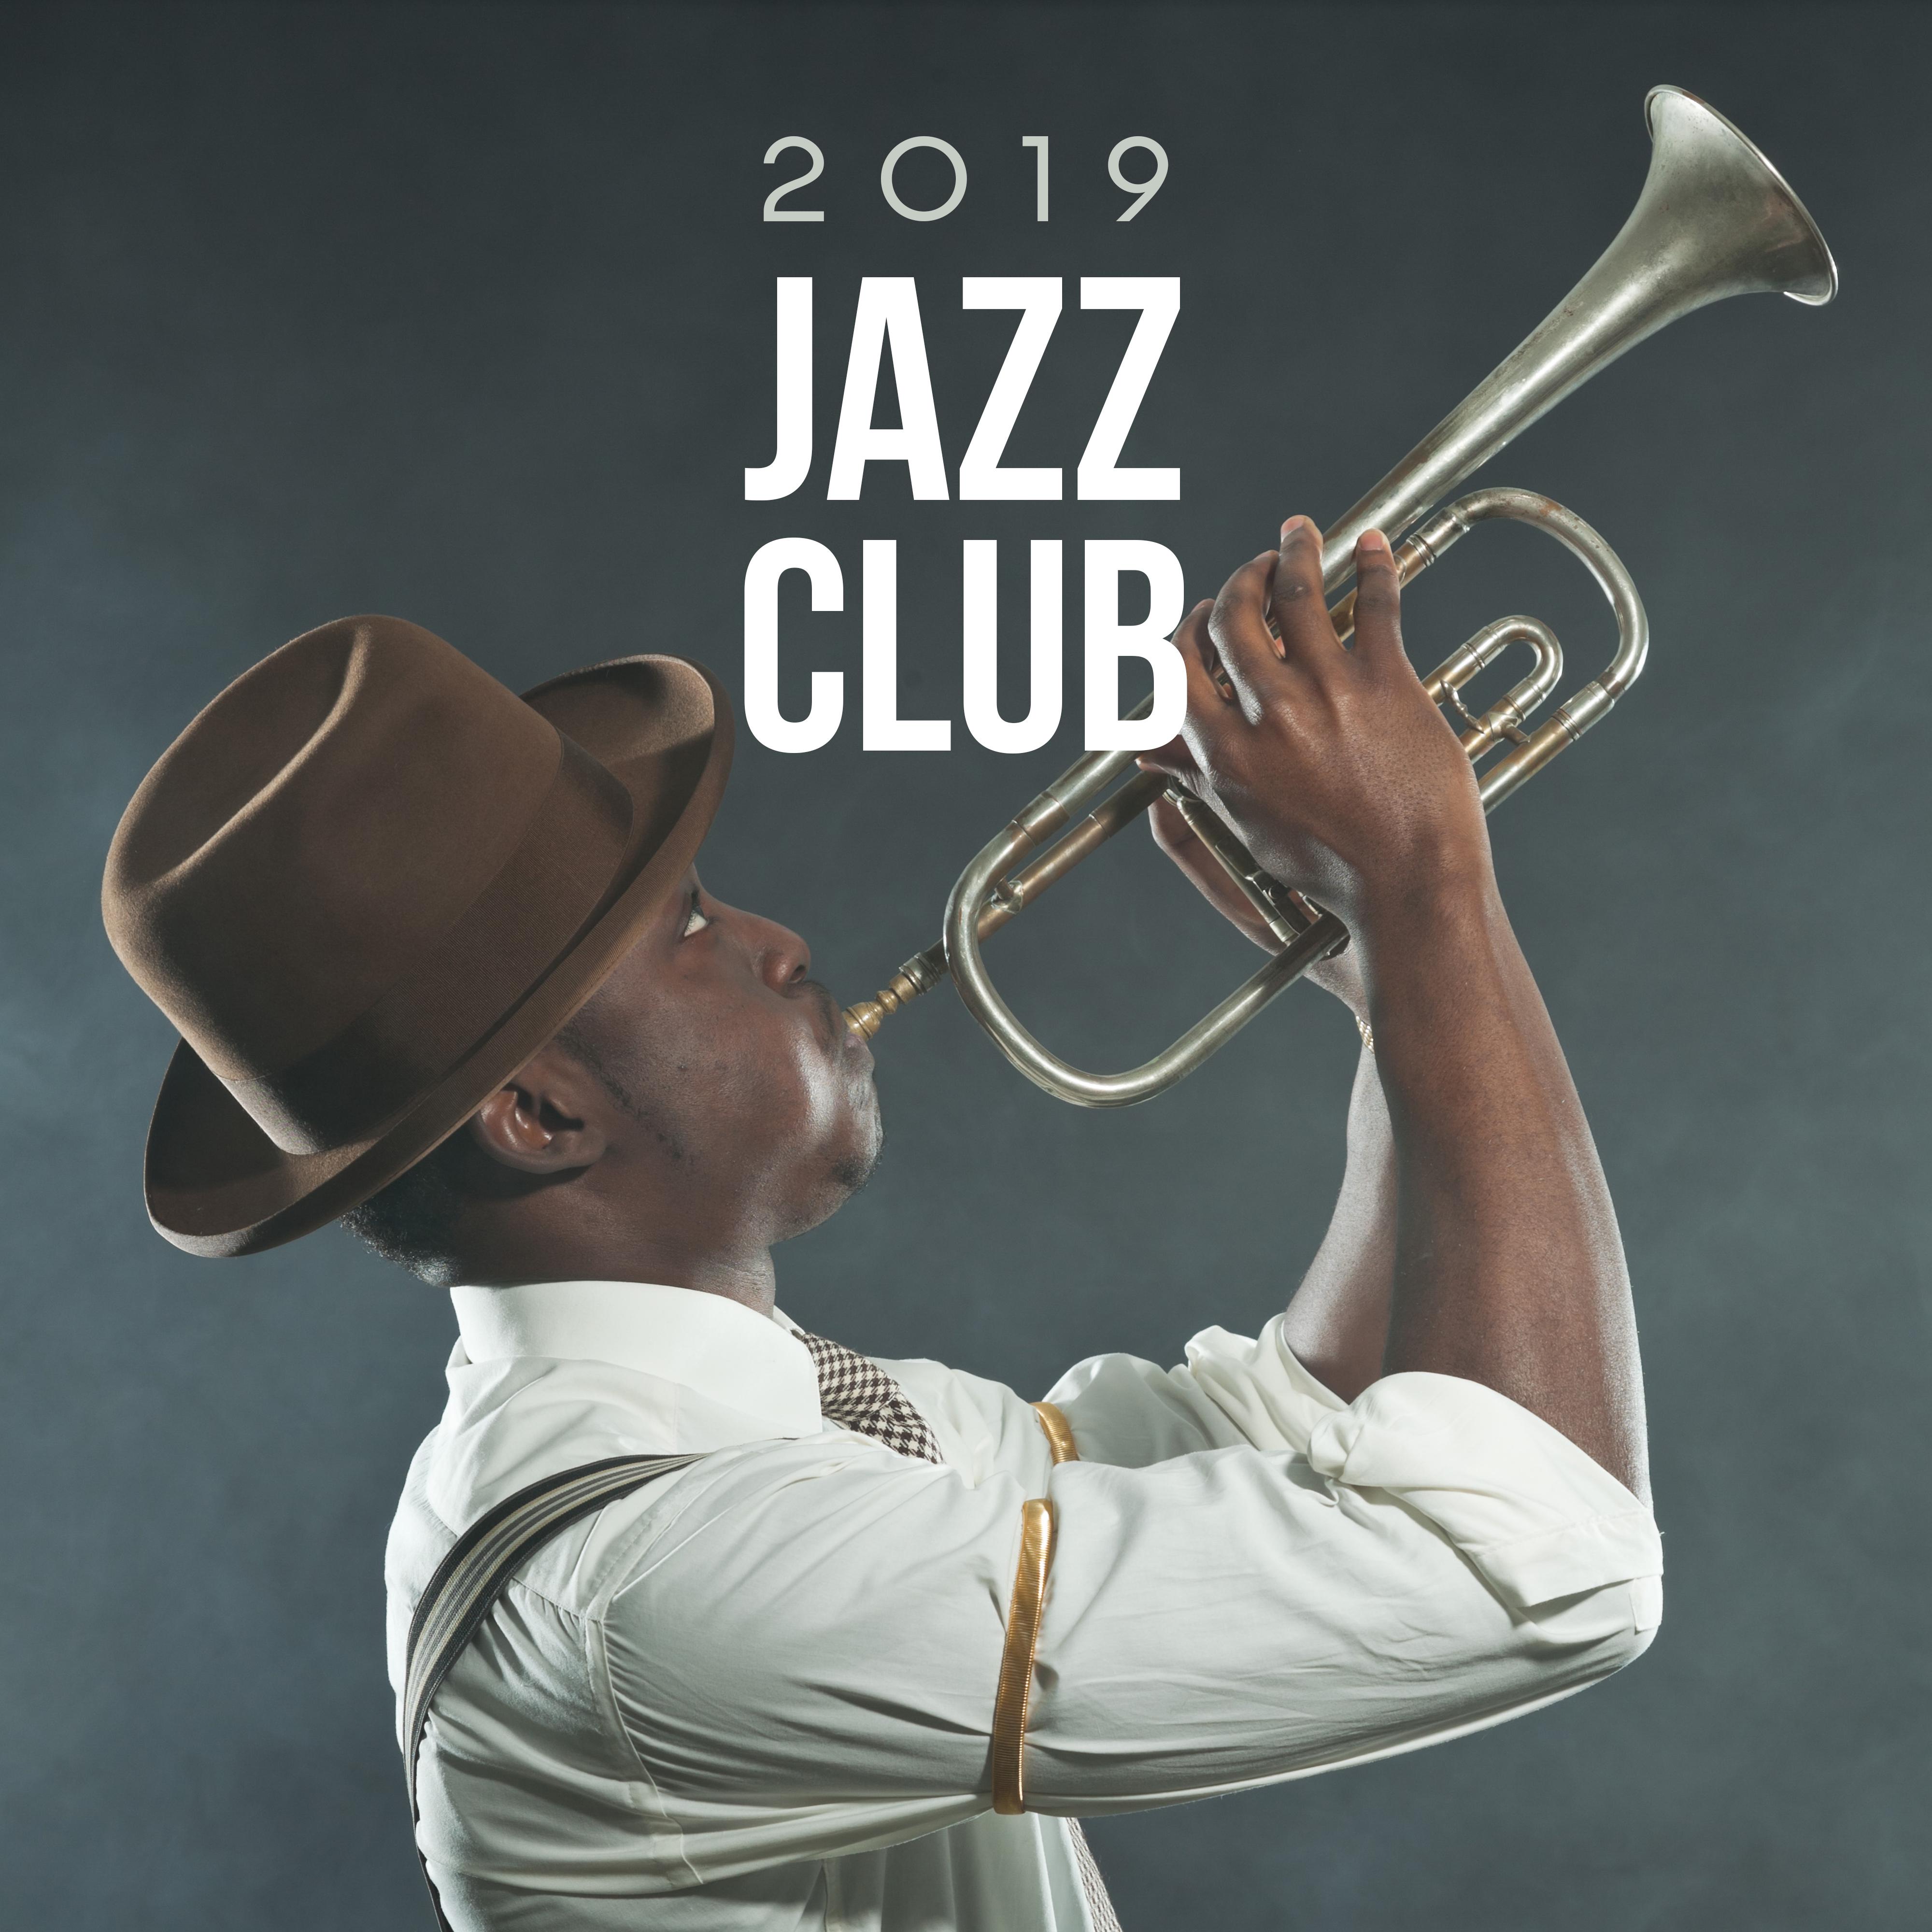 2019 Jazz Club  Party Hits, Instrumental Jazz Music Ambient, Relaxing Music After Work, Perfect Gentle Jazz, Lounge Bar